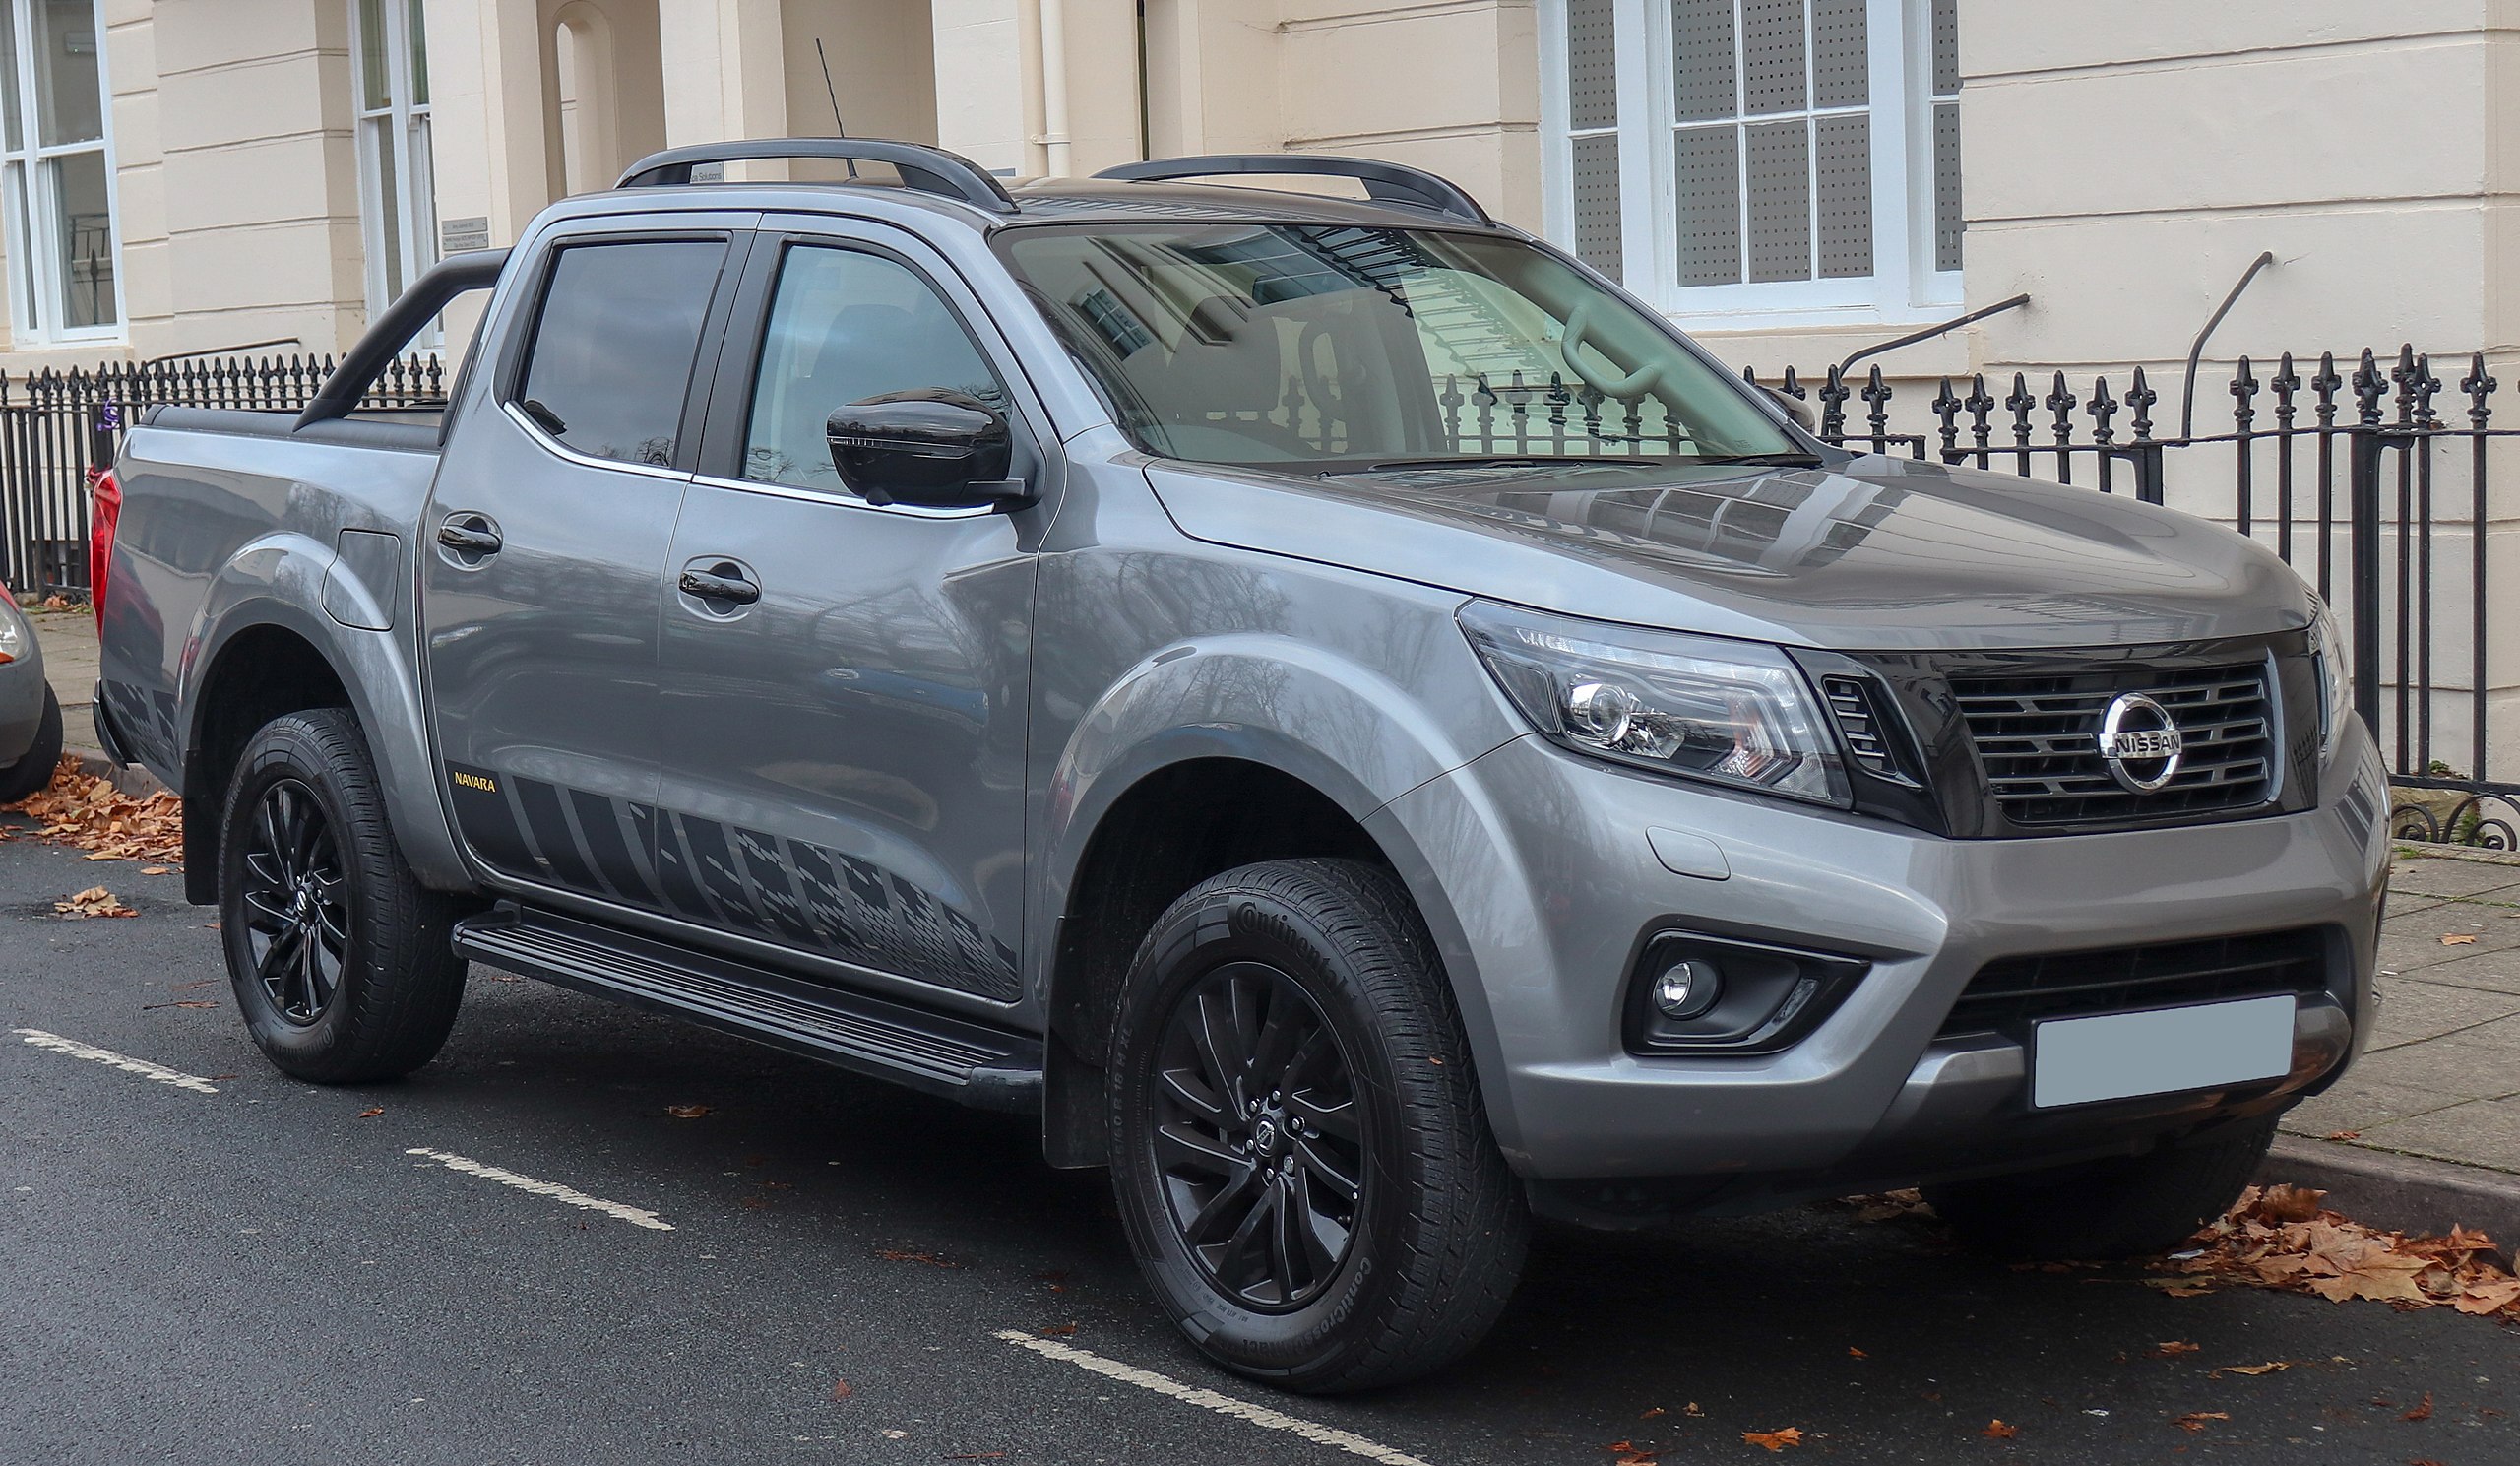 Nissan Navara 2.3 SID309 Dpf off Egr off Vmax off revised by ChiptuneRS